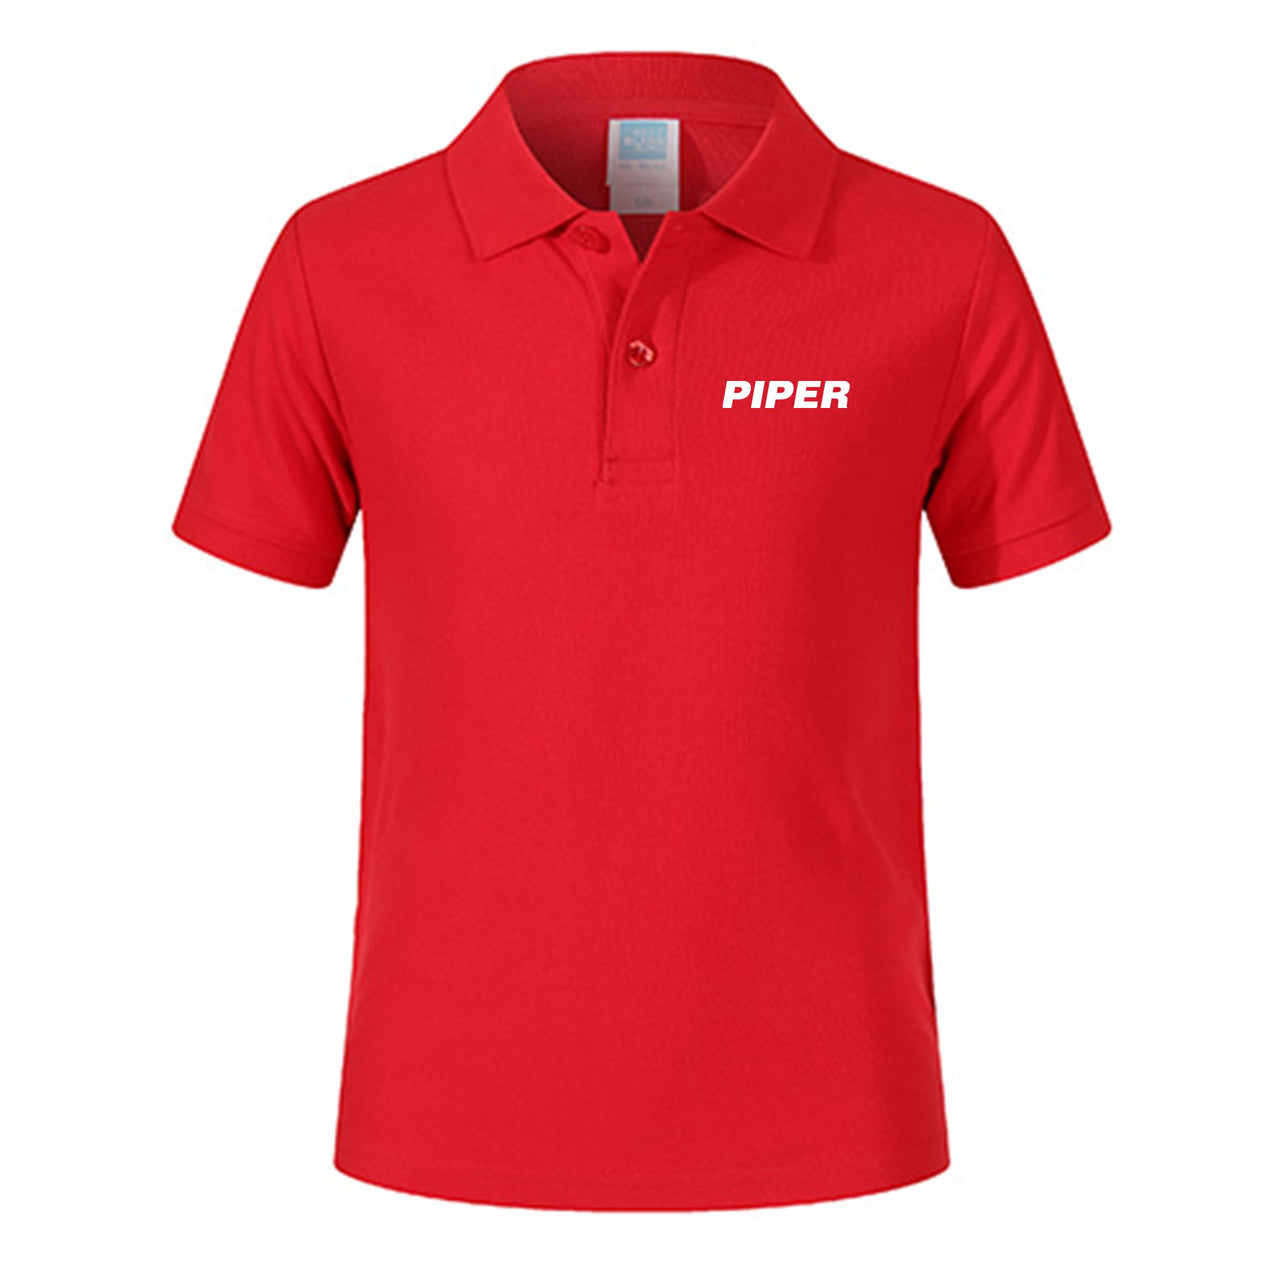 Piper & Text Designed Children Polo T-Shirts